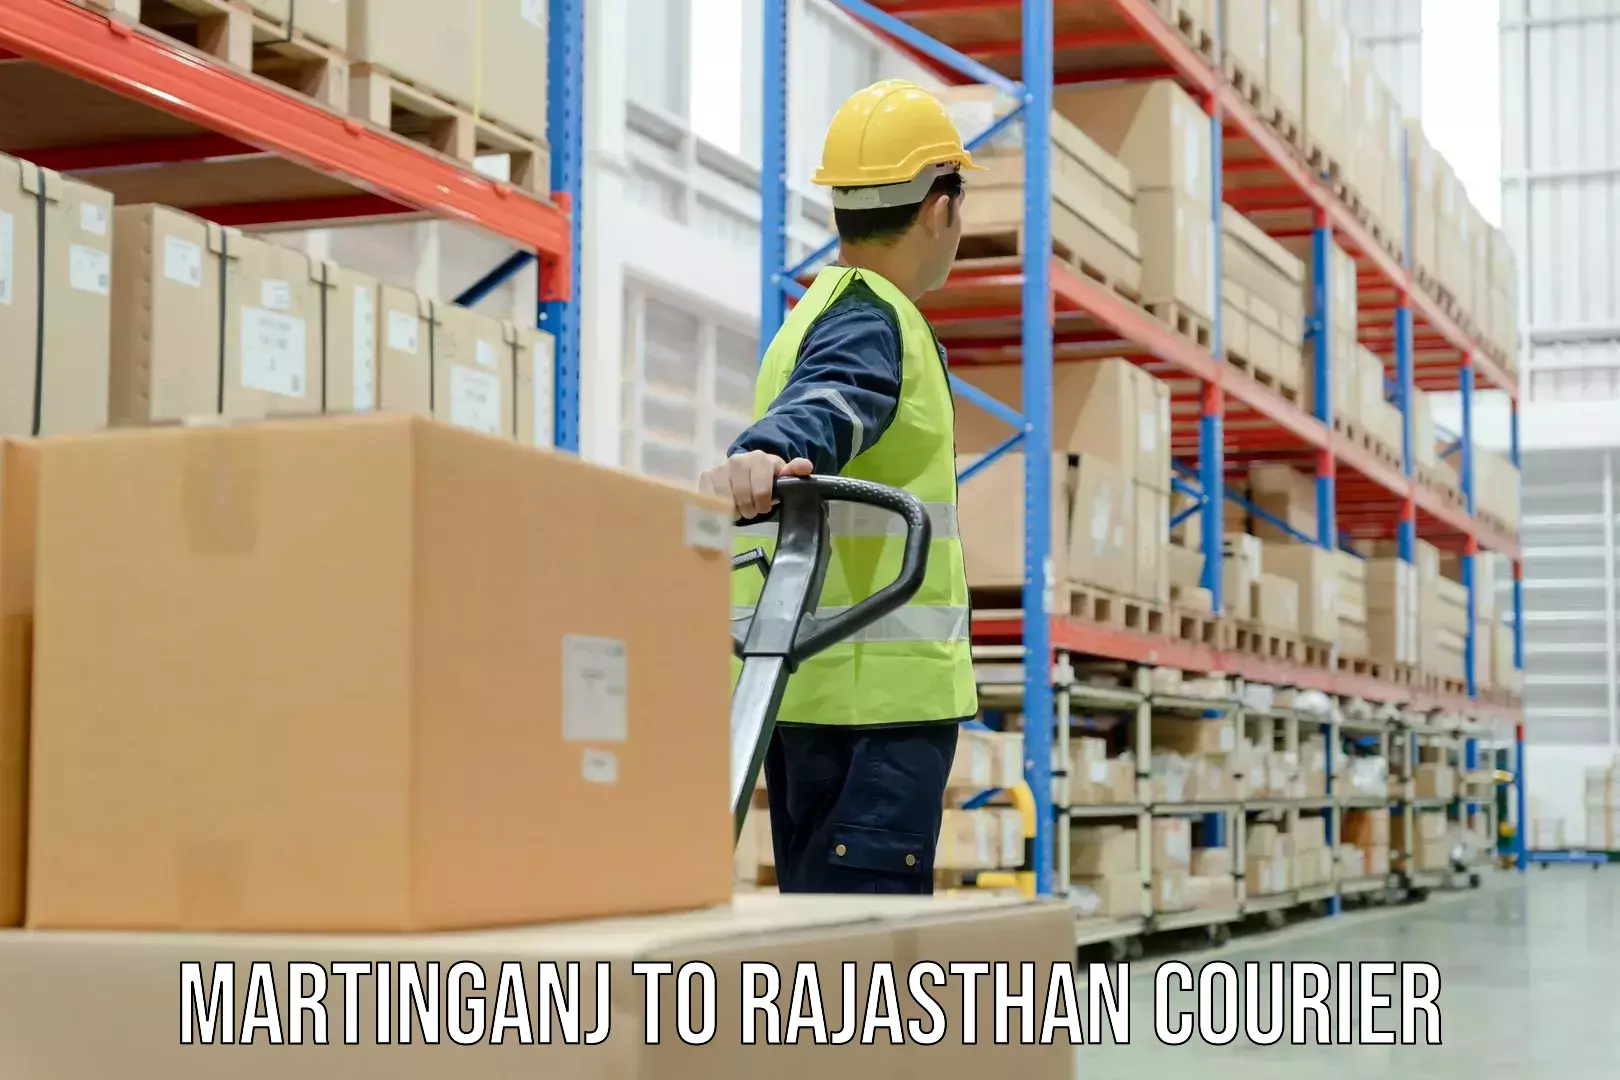 On-call courier service Martinganj to Rajasthan